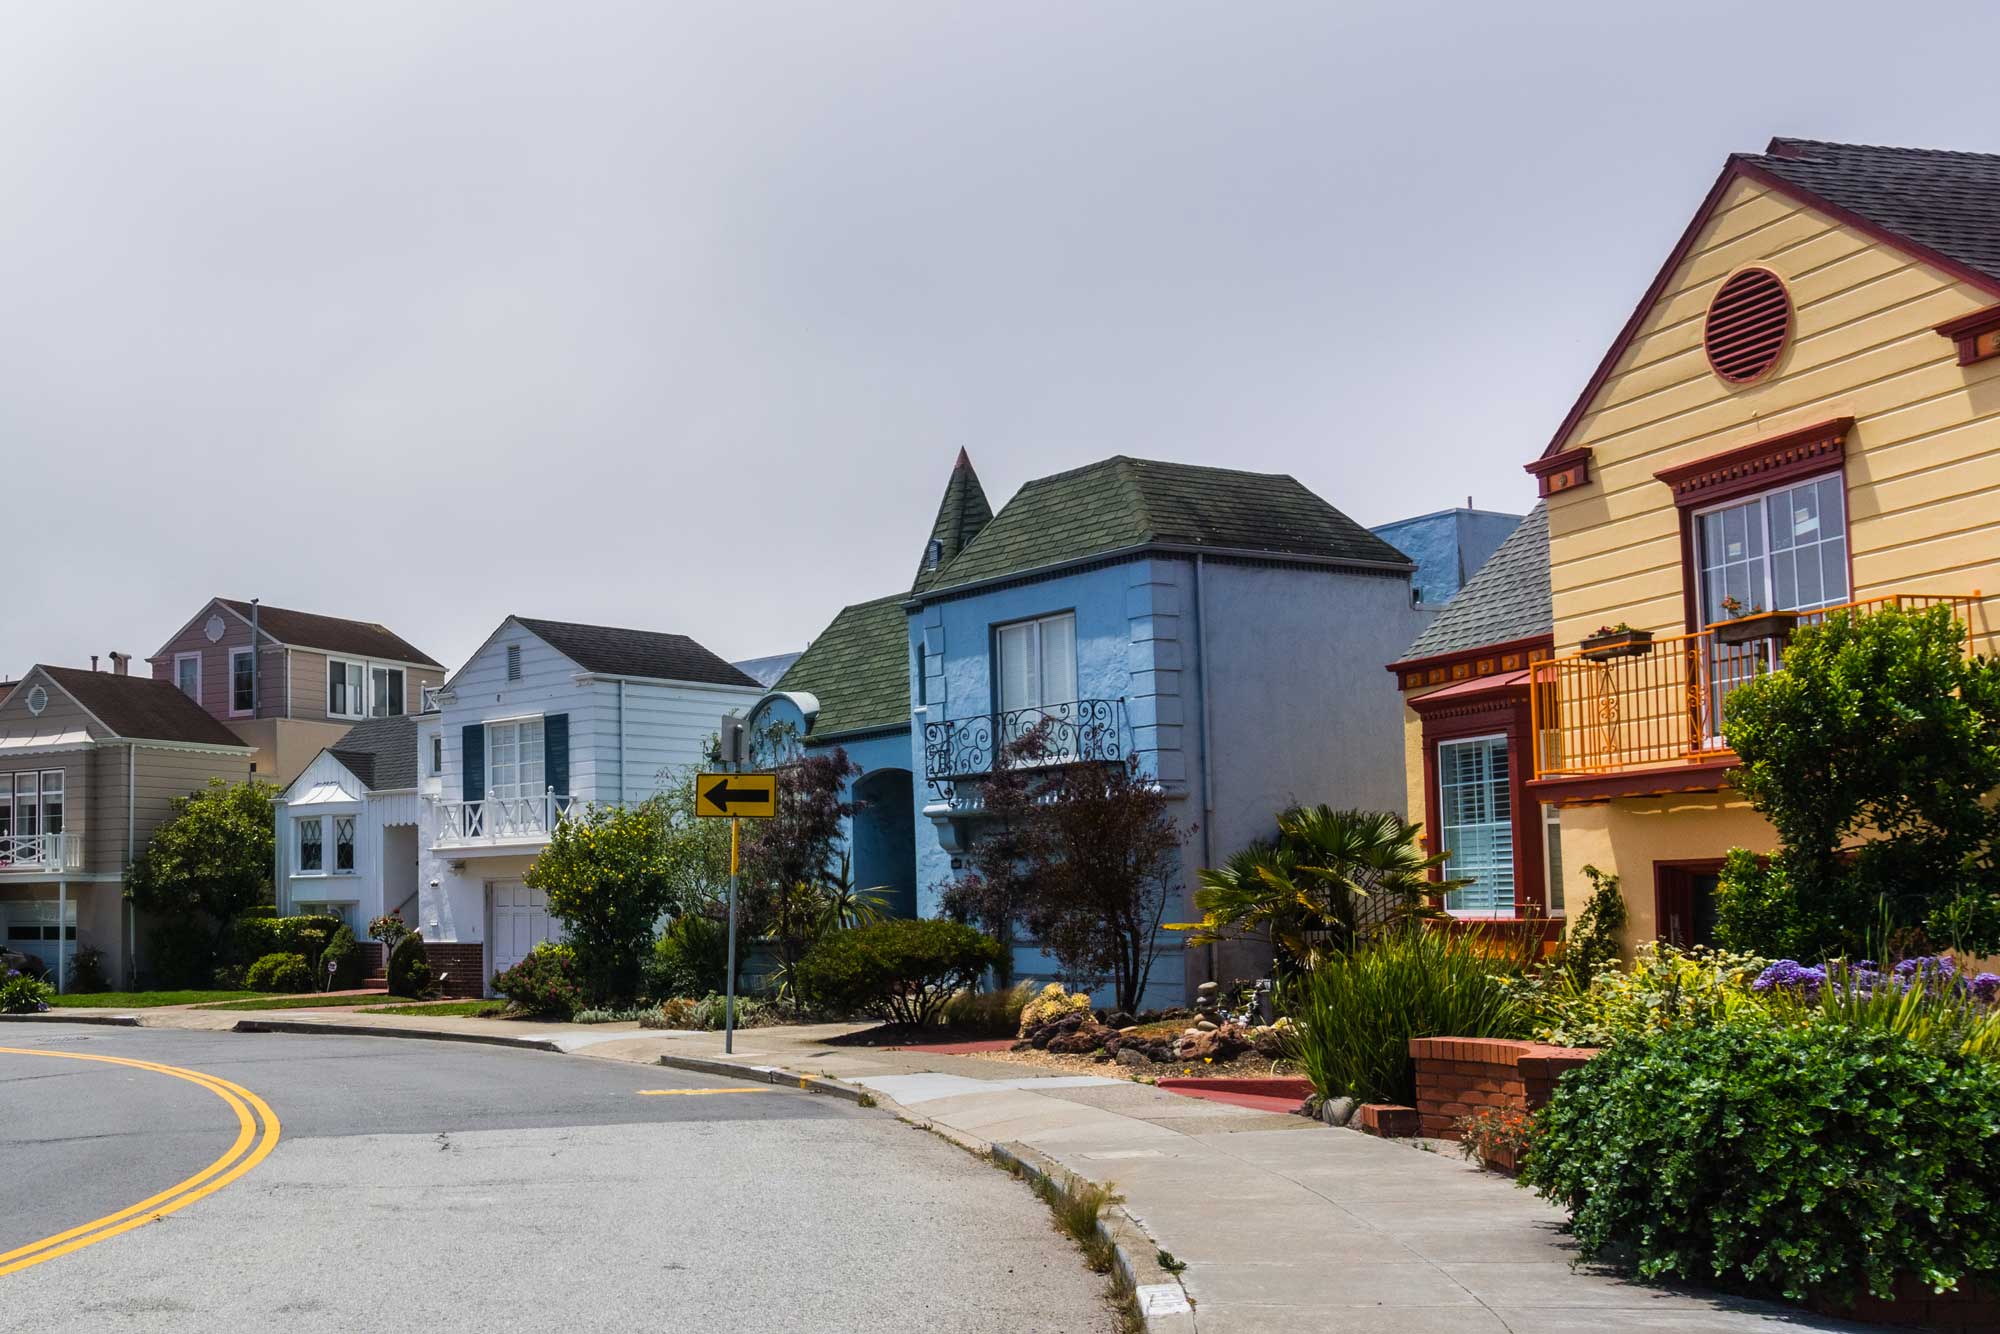 California’s High Housing Costs Have Created a Million “House Rich” Millionaires - Public Policy Institute of California